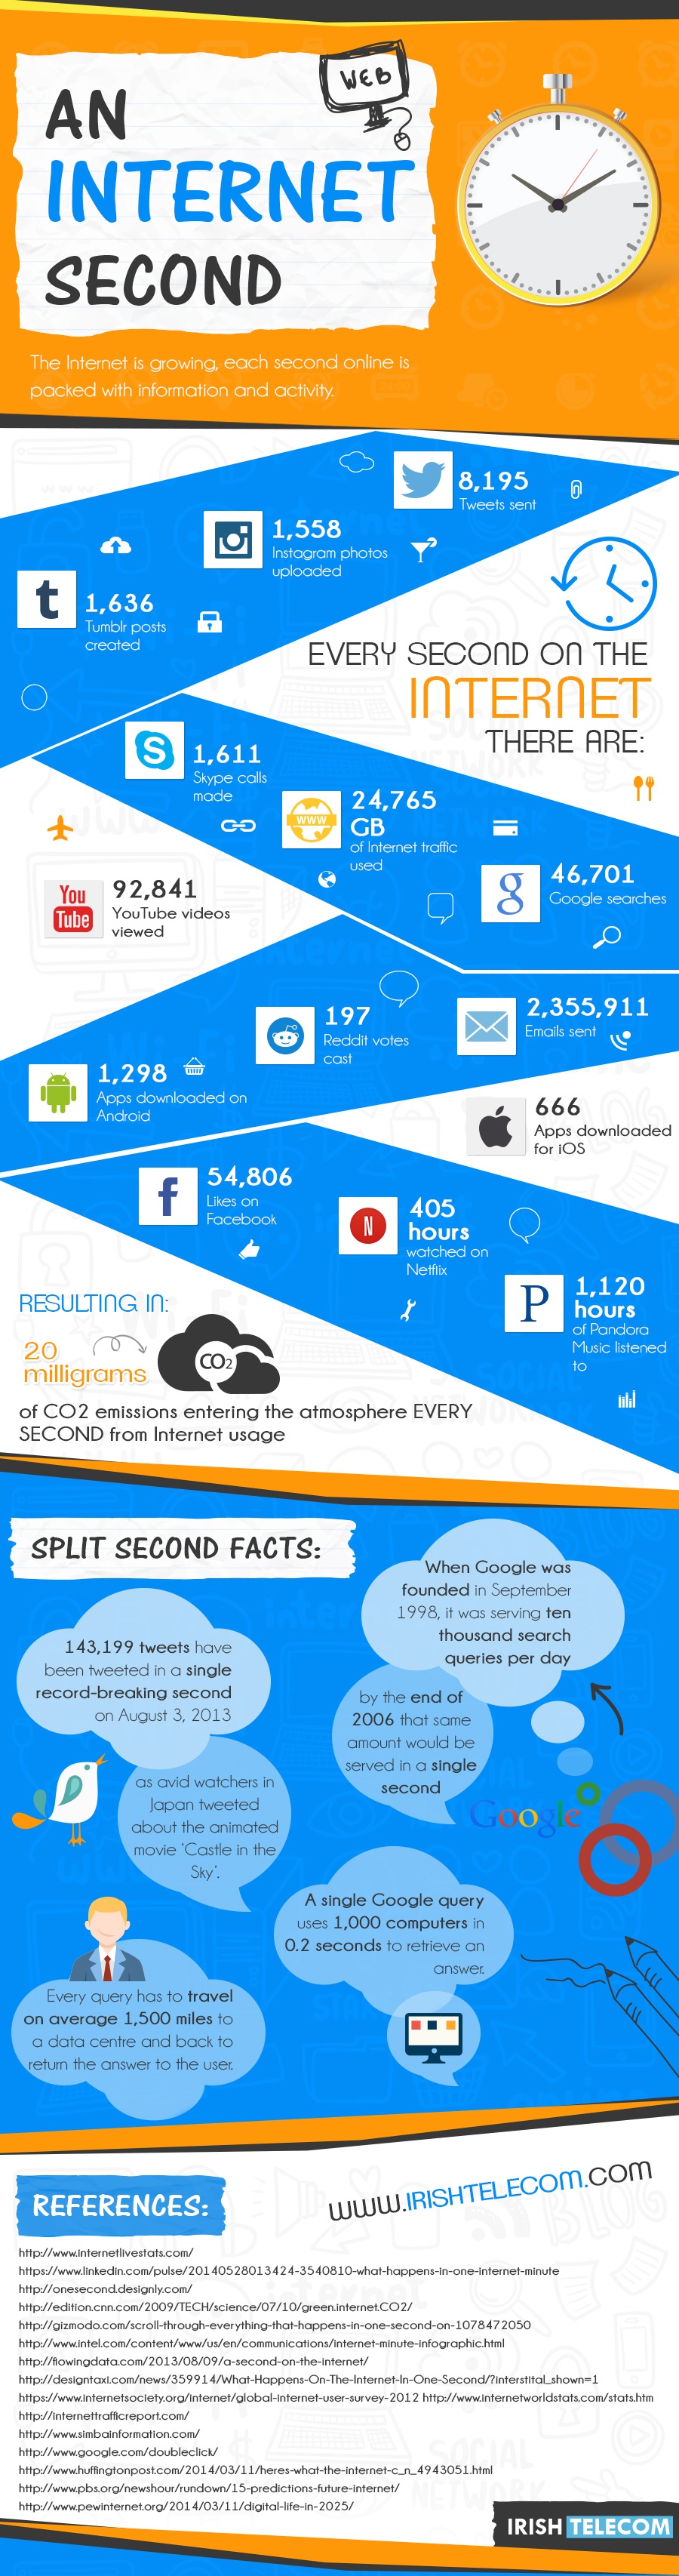 An-Internet-Second-Infographic